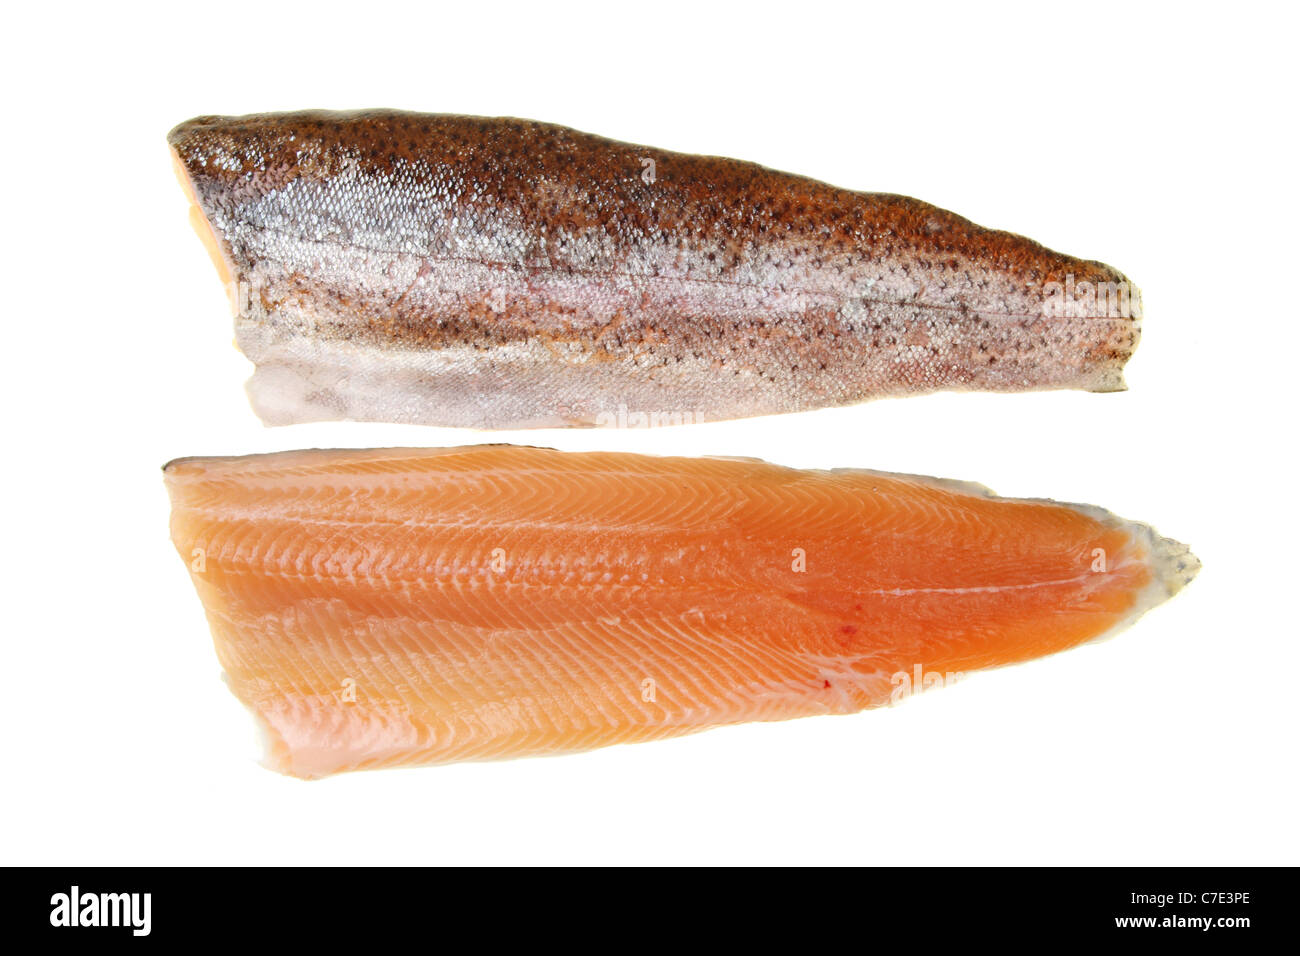 Two trout fillets isolated against white Stock Photo